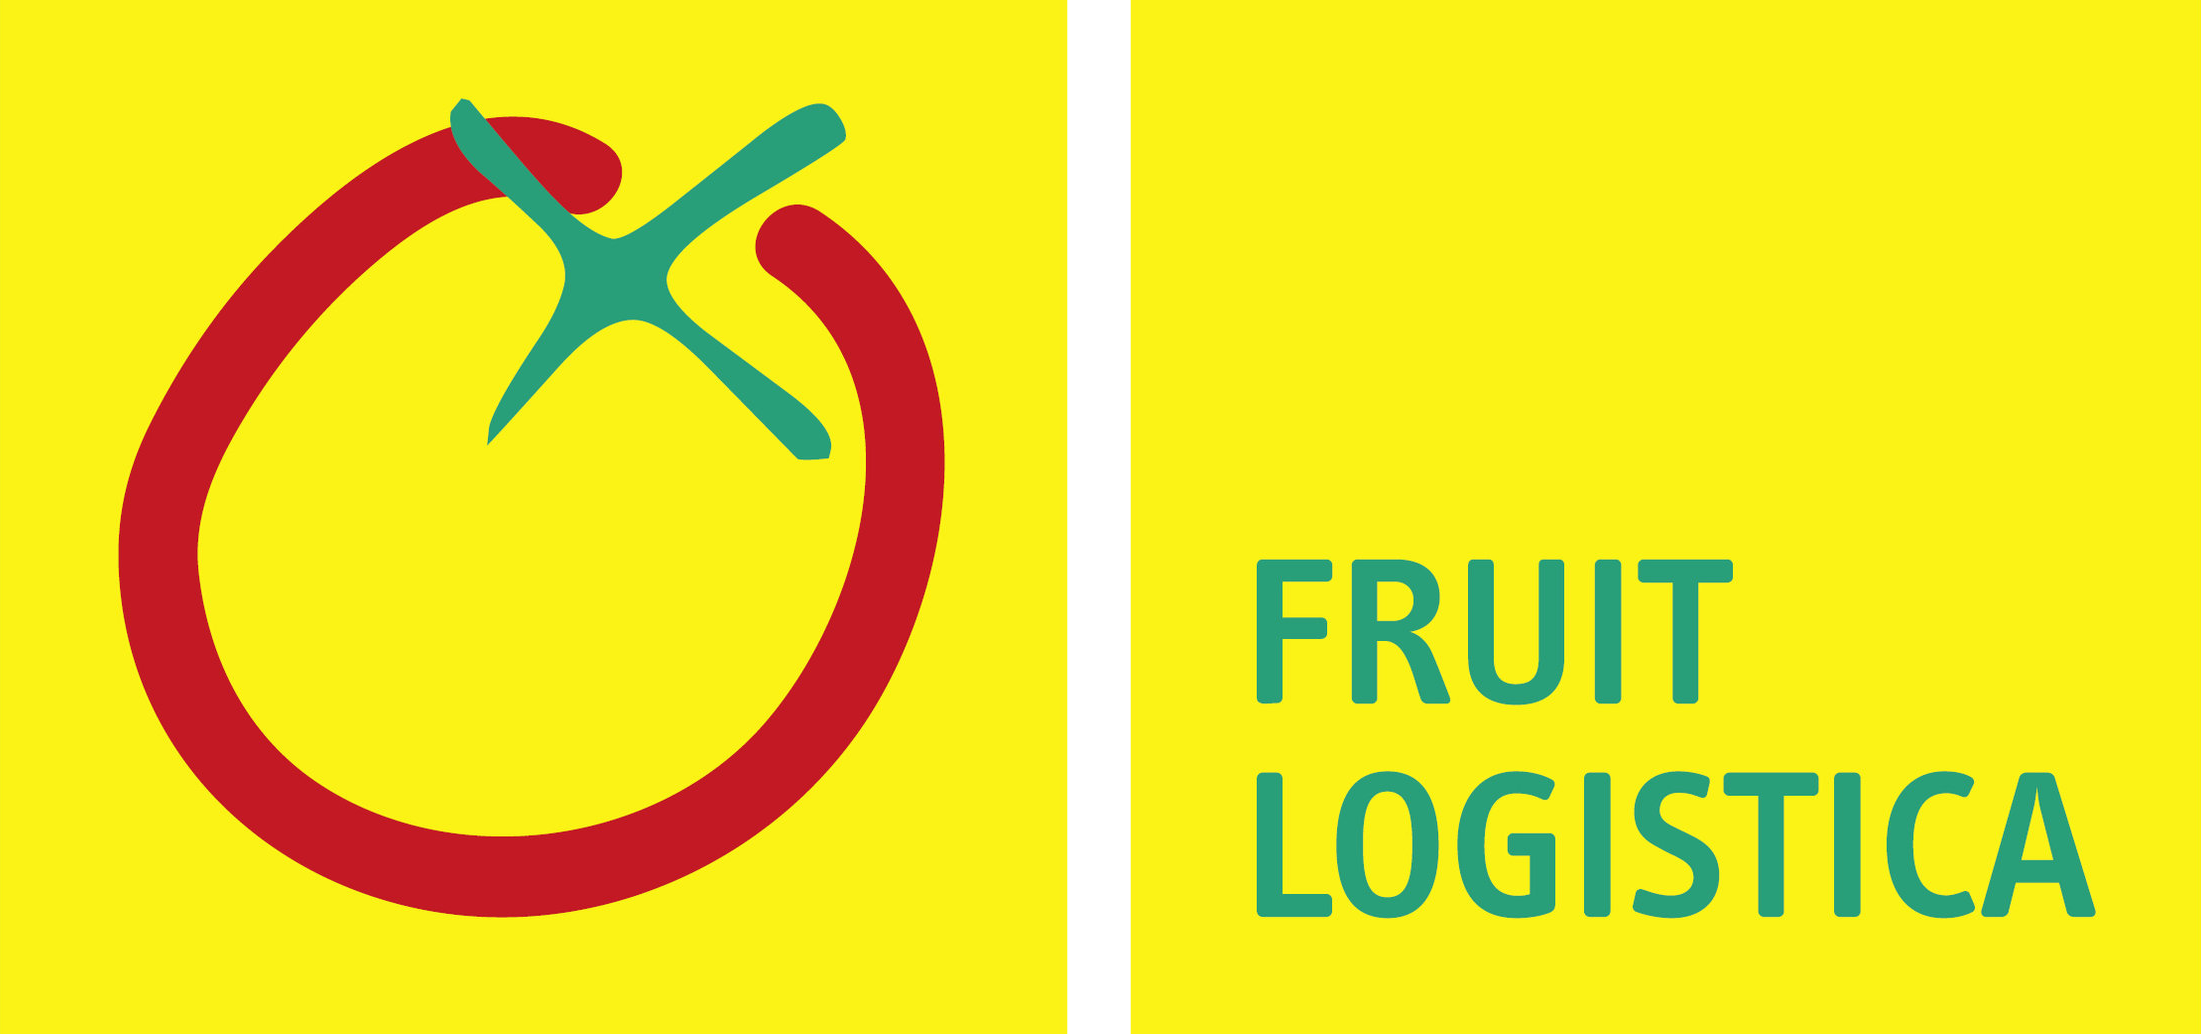 FRUIT LOGISTICA 2020: The global stage for new ideas, new input and new solutions